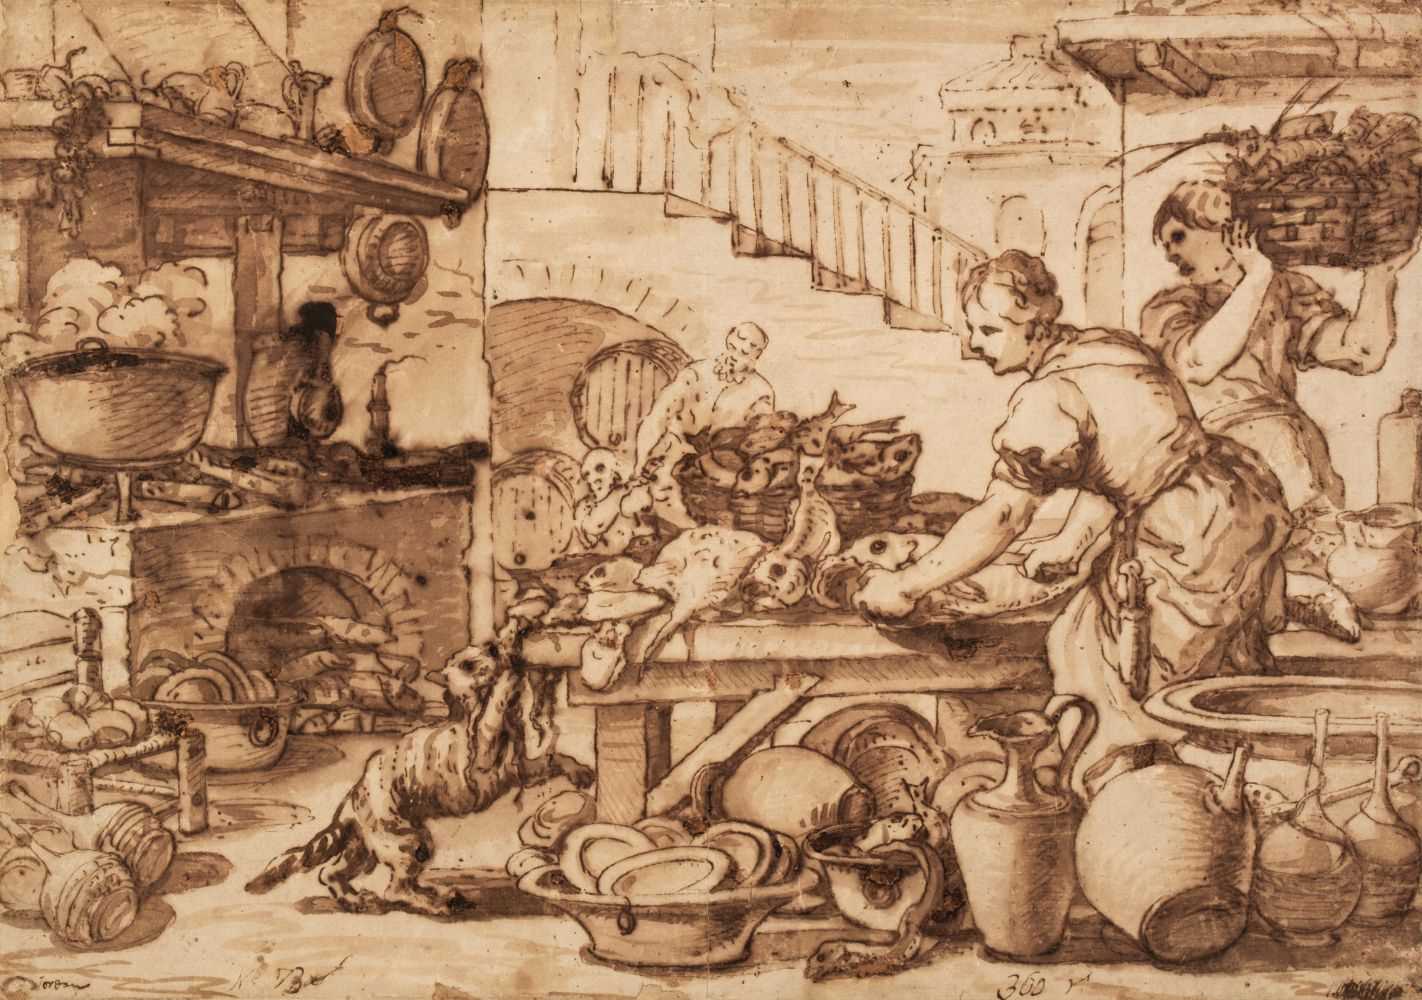 8 - Giordano (Luca, Naples 1634-1705, attributed), Women in a Kitchen, pen and brown ink